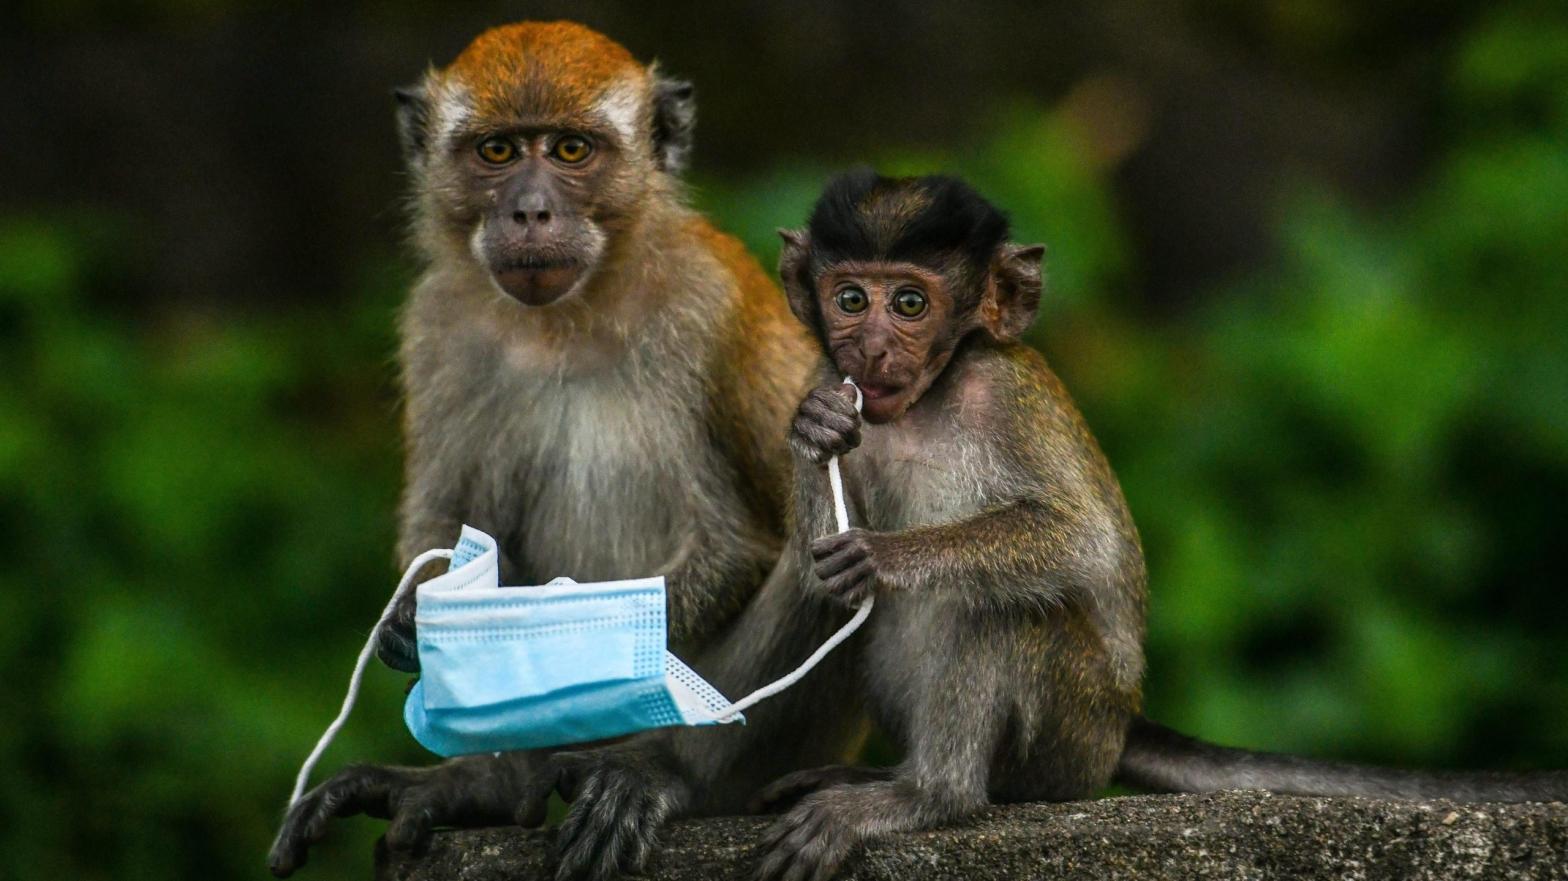 Macaque monkeys in Malaysia play with a face mask on October 30, 2020. (Photo: Mohd Rasfan/AFP, Getty Images)